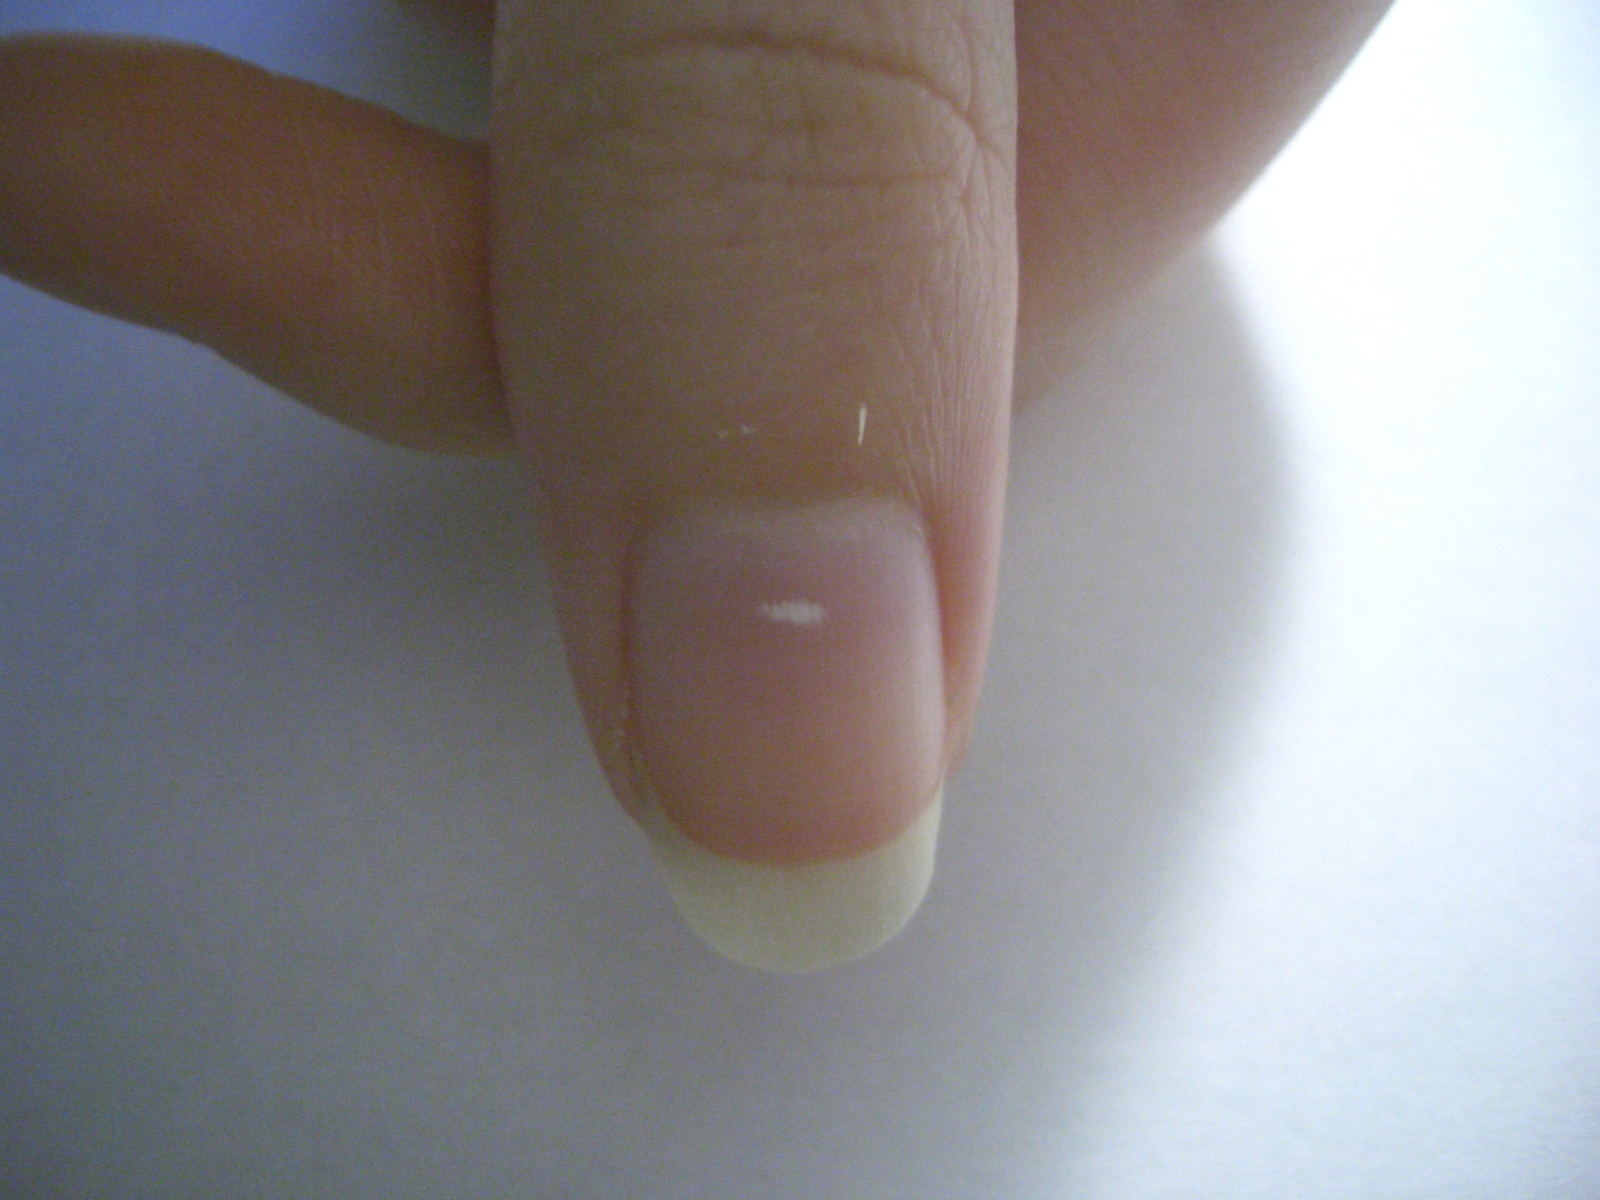 Myth: Why we get white spots on nails | Interviews | Naked Scientists